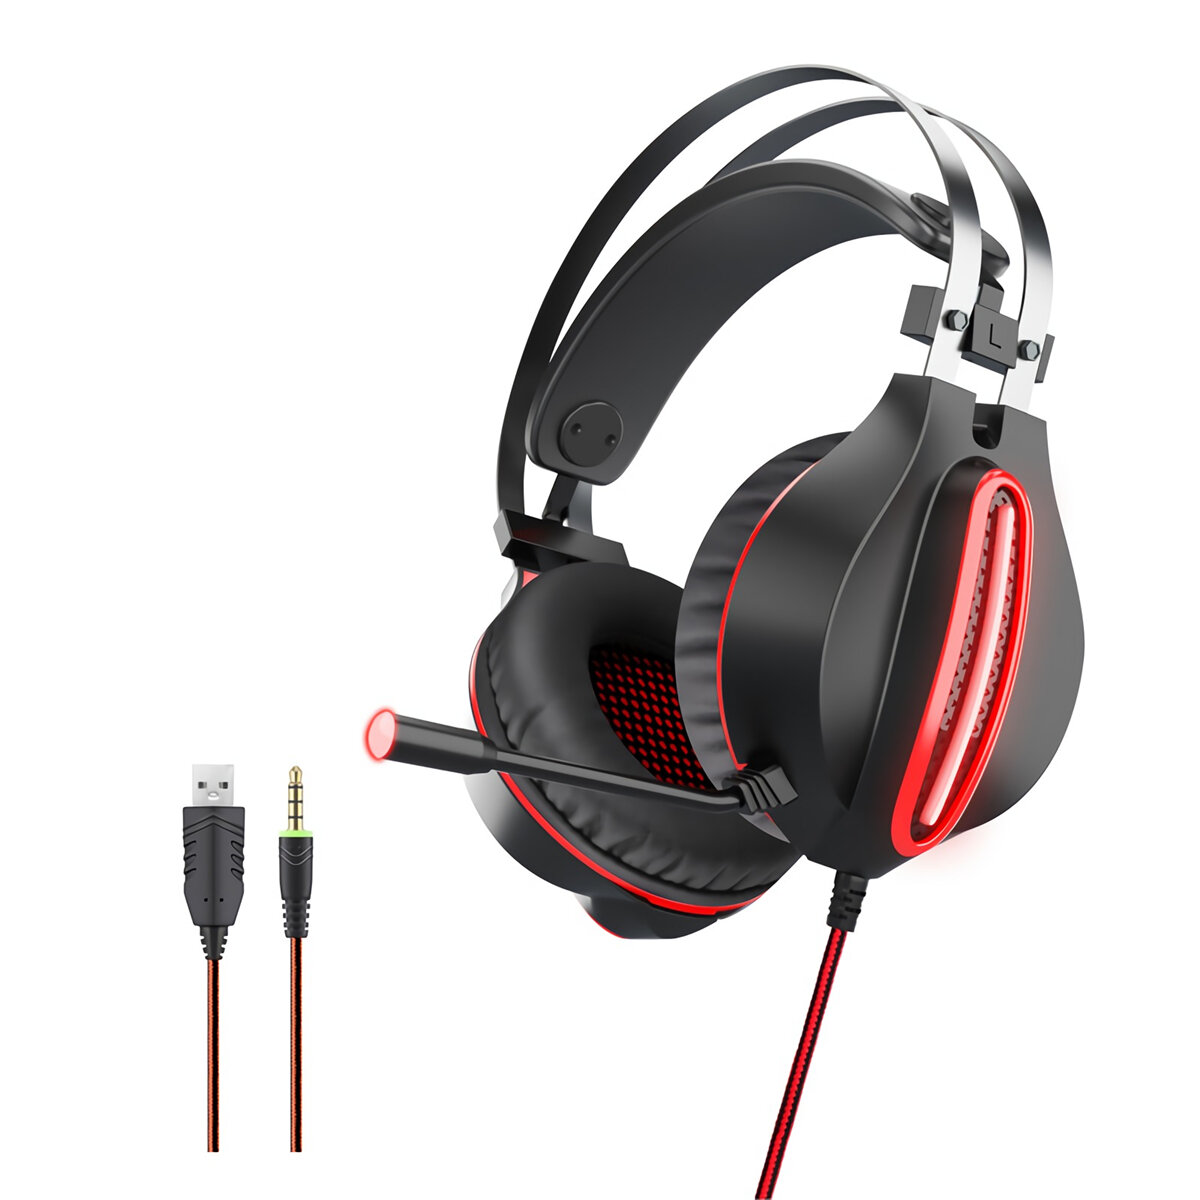 

OVLENG GT62 Wired Gaming Headset 3.5mm Jack 50mm Bass Stereo Sound LED Light E-sport Headphone with Mic for PS3/4 Comput